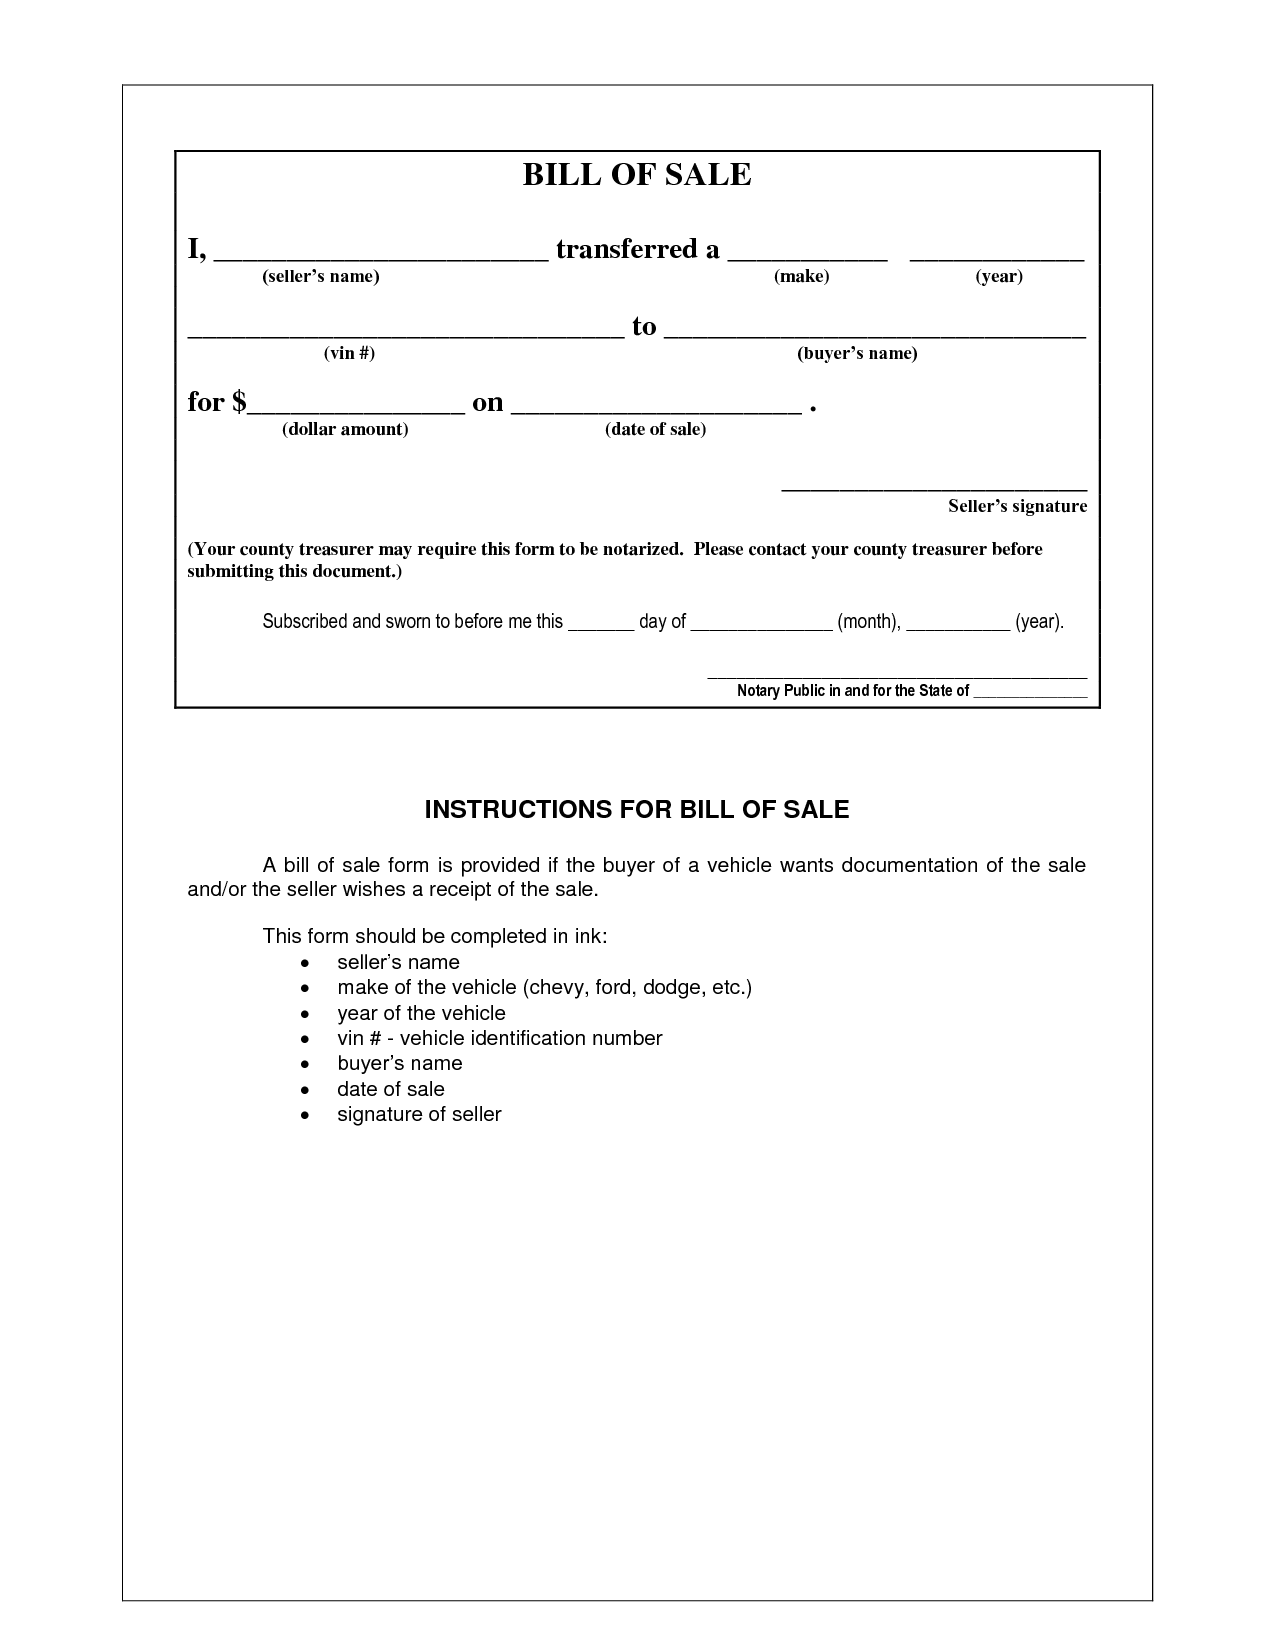 trailer-bill-of-sale-forms-template-business-format